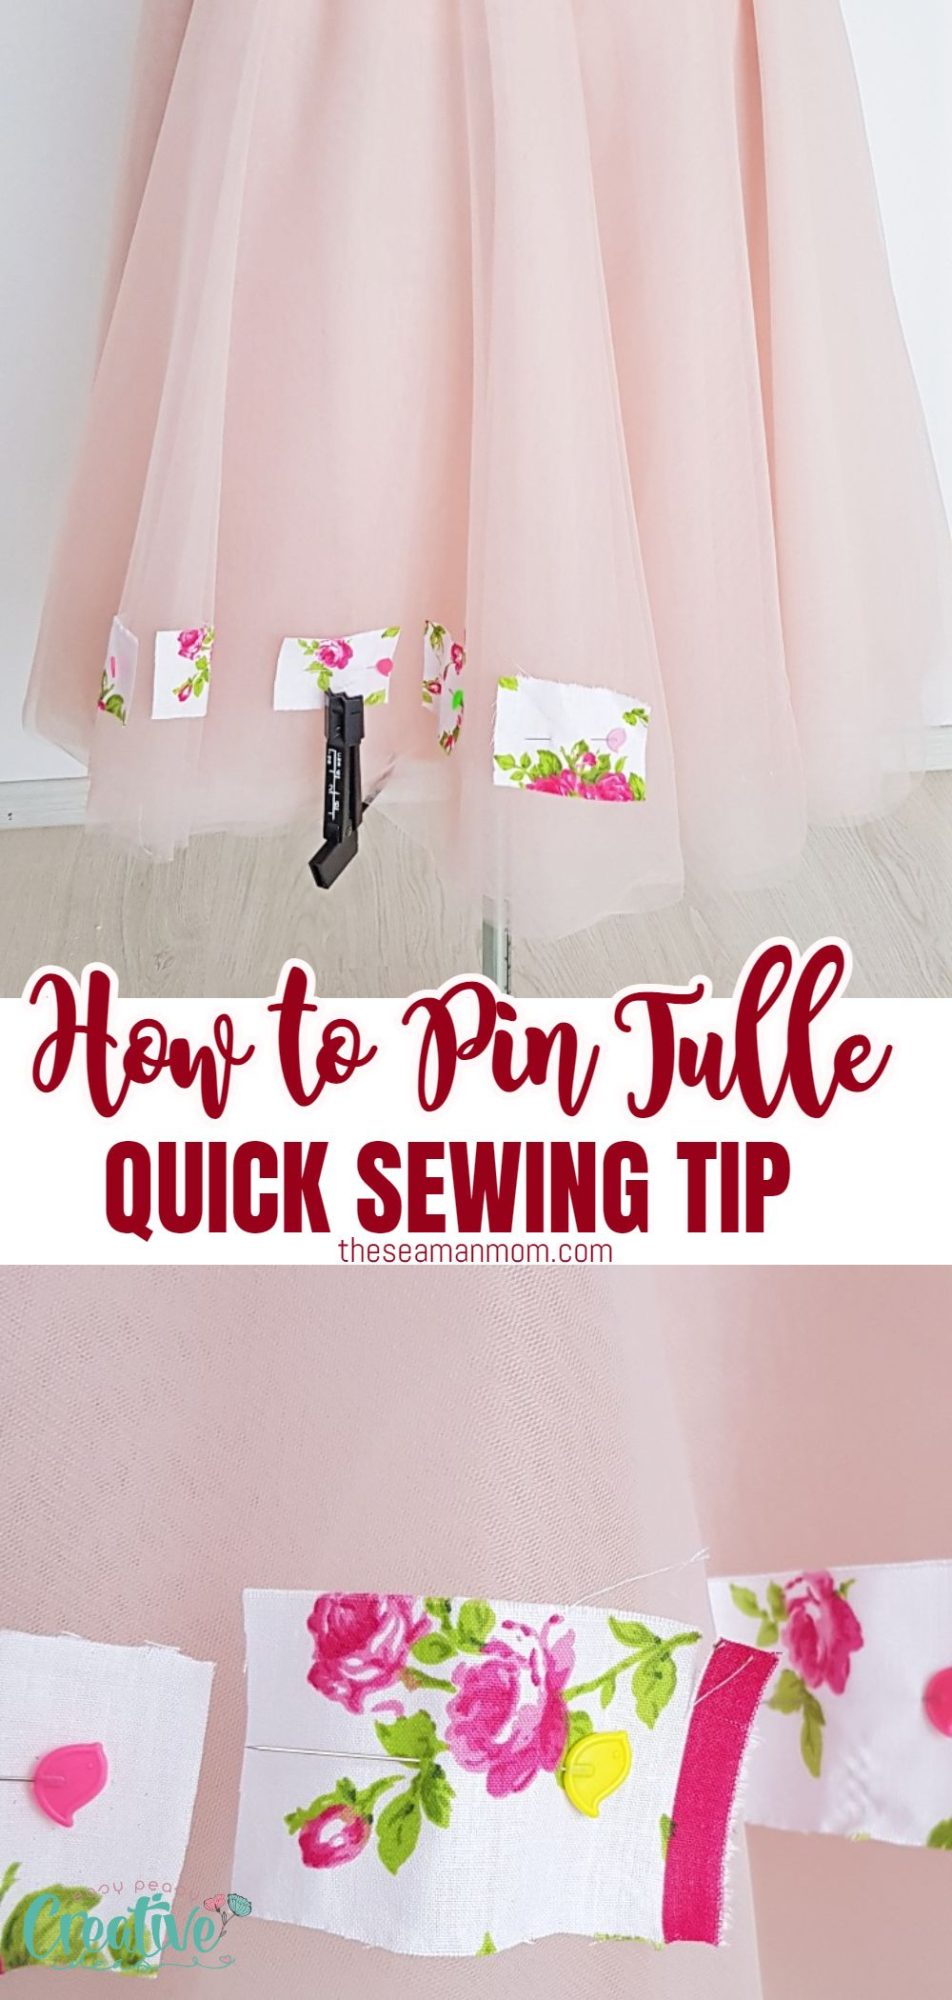 Photo collage of a tulle skirt pinned with fabric scraps that illustrate how to pin tulle fabric properly